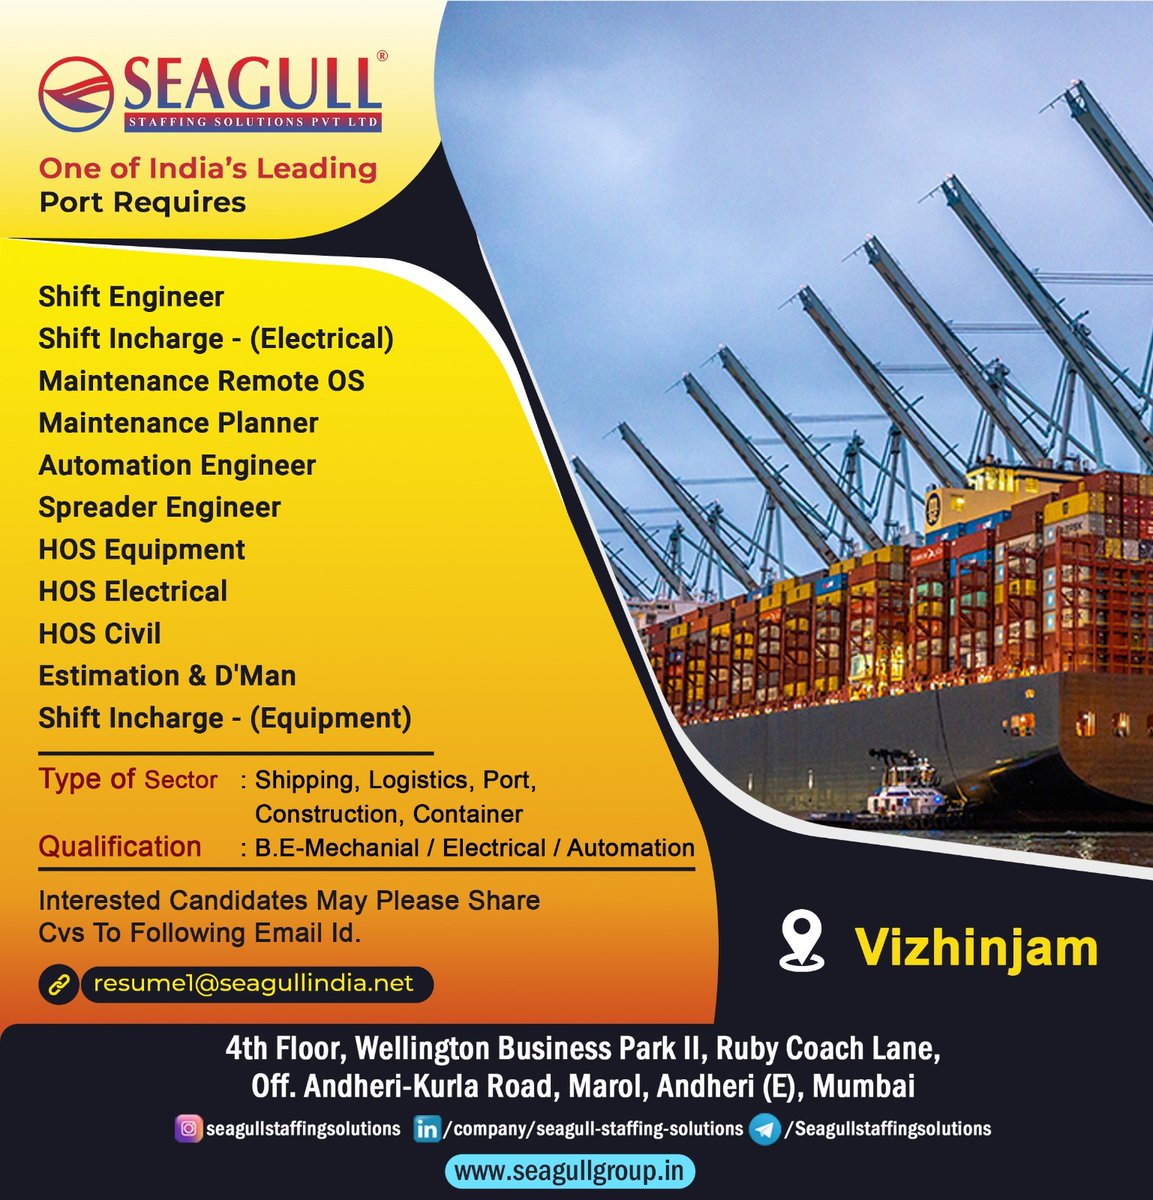 VIZHINJAM JOB OPENING 2023
Interested candidate share Cv on Below mentioned details.
sunil.more@seagullindia.net
#portjob #portmanagment #portandlogistic #qcjobs #qcengineer #qcelectrical #qcmechanical #qchydraulic #automationsystems #helper #CRMG #freejobs #freeadvertising